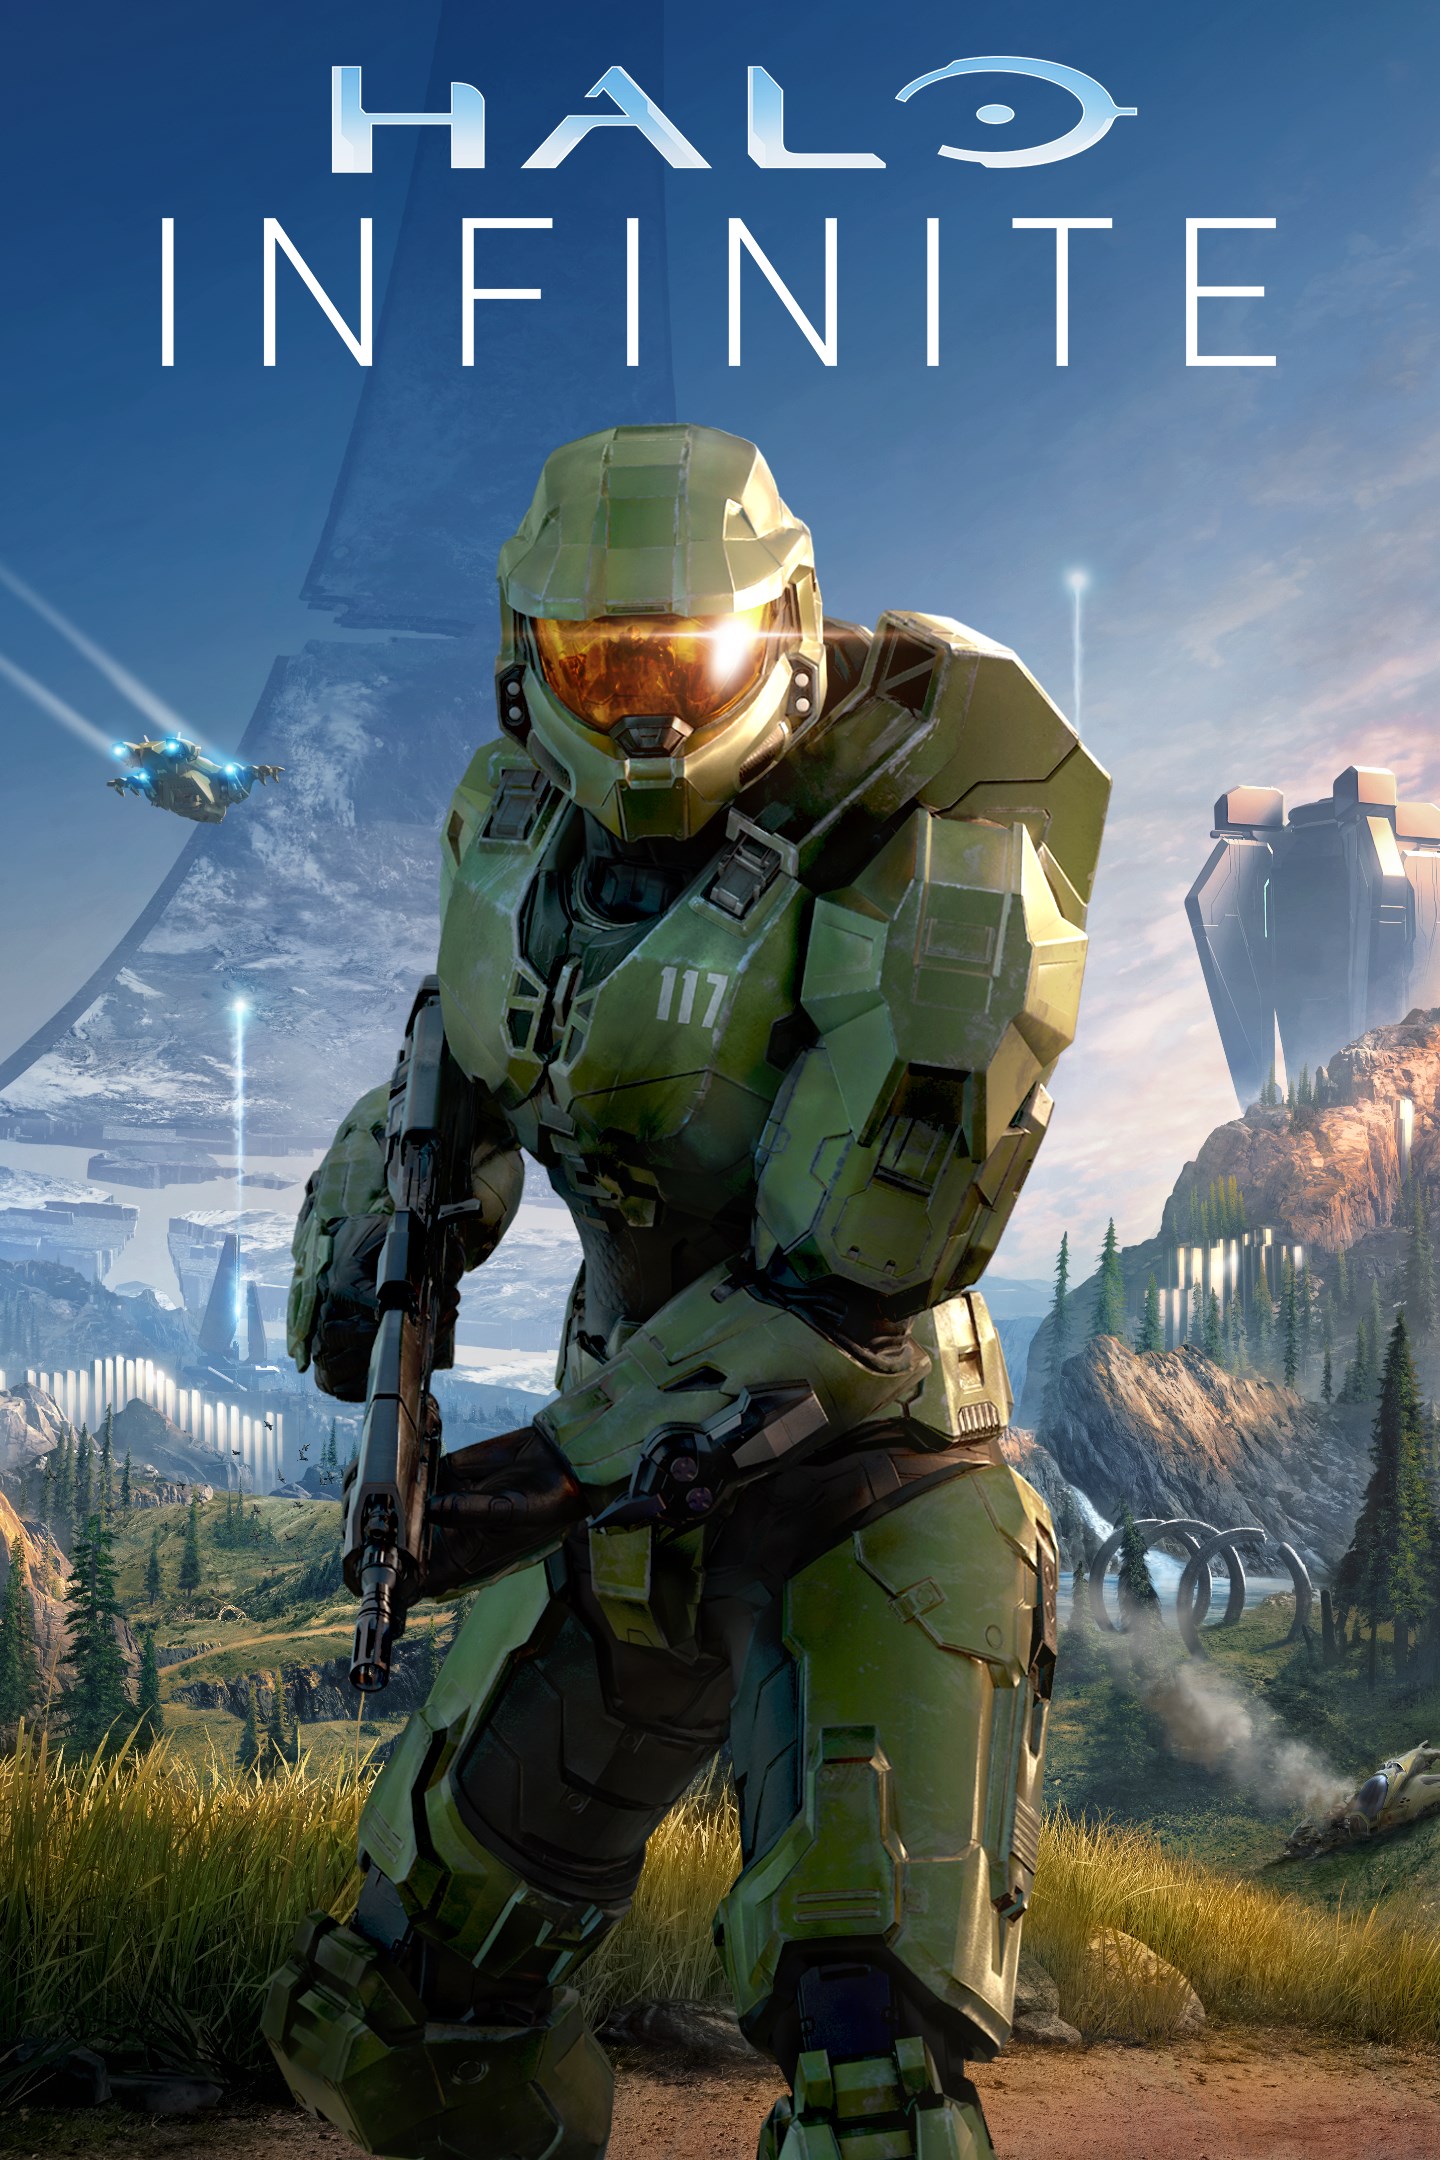 High Quality Halo infinite cover Blank Meme Template